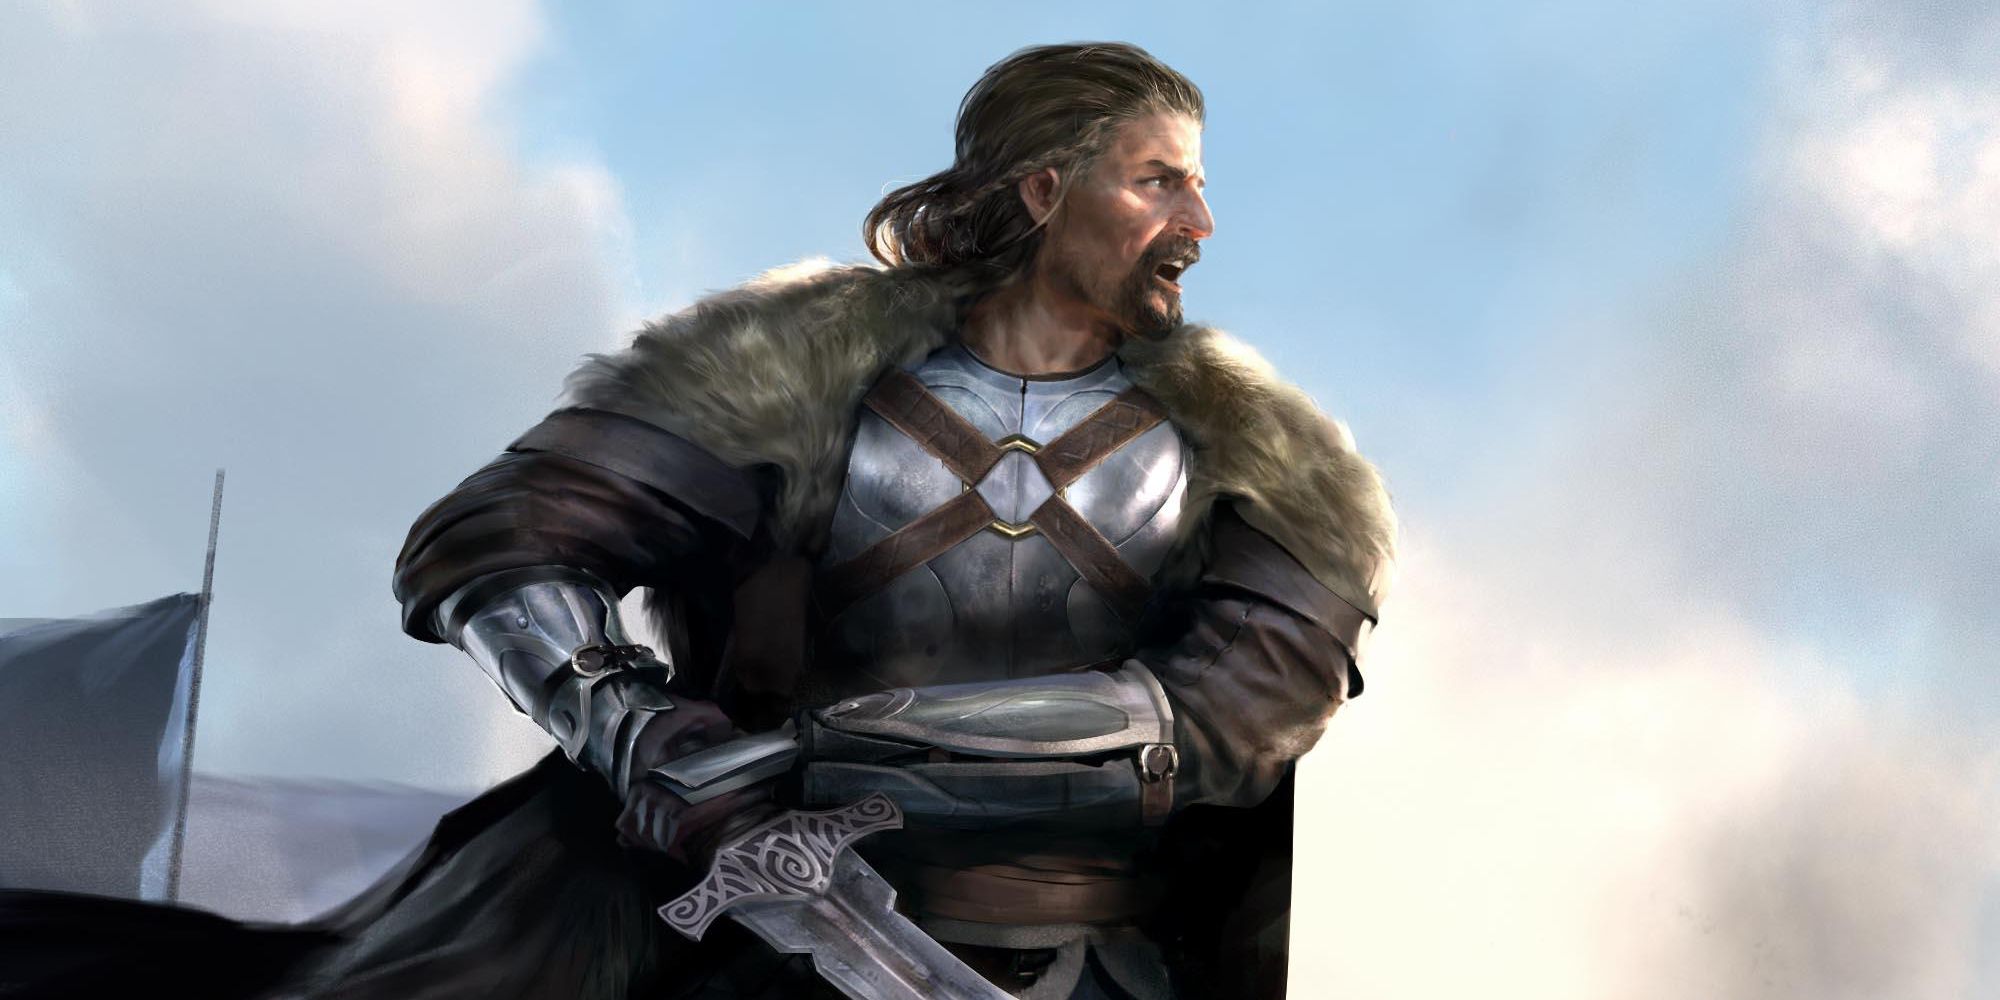 Ulfric Stormcloak's violent past and tactics show that players should never side with him in Skyrim's Civil War.